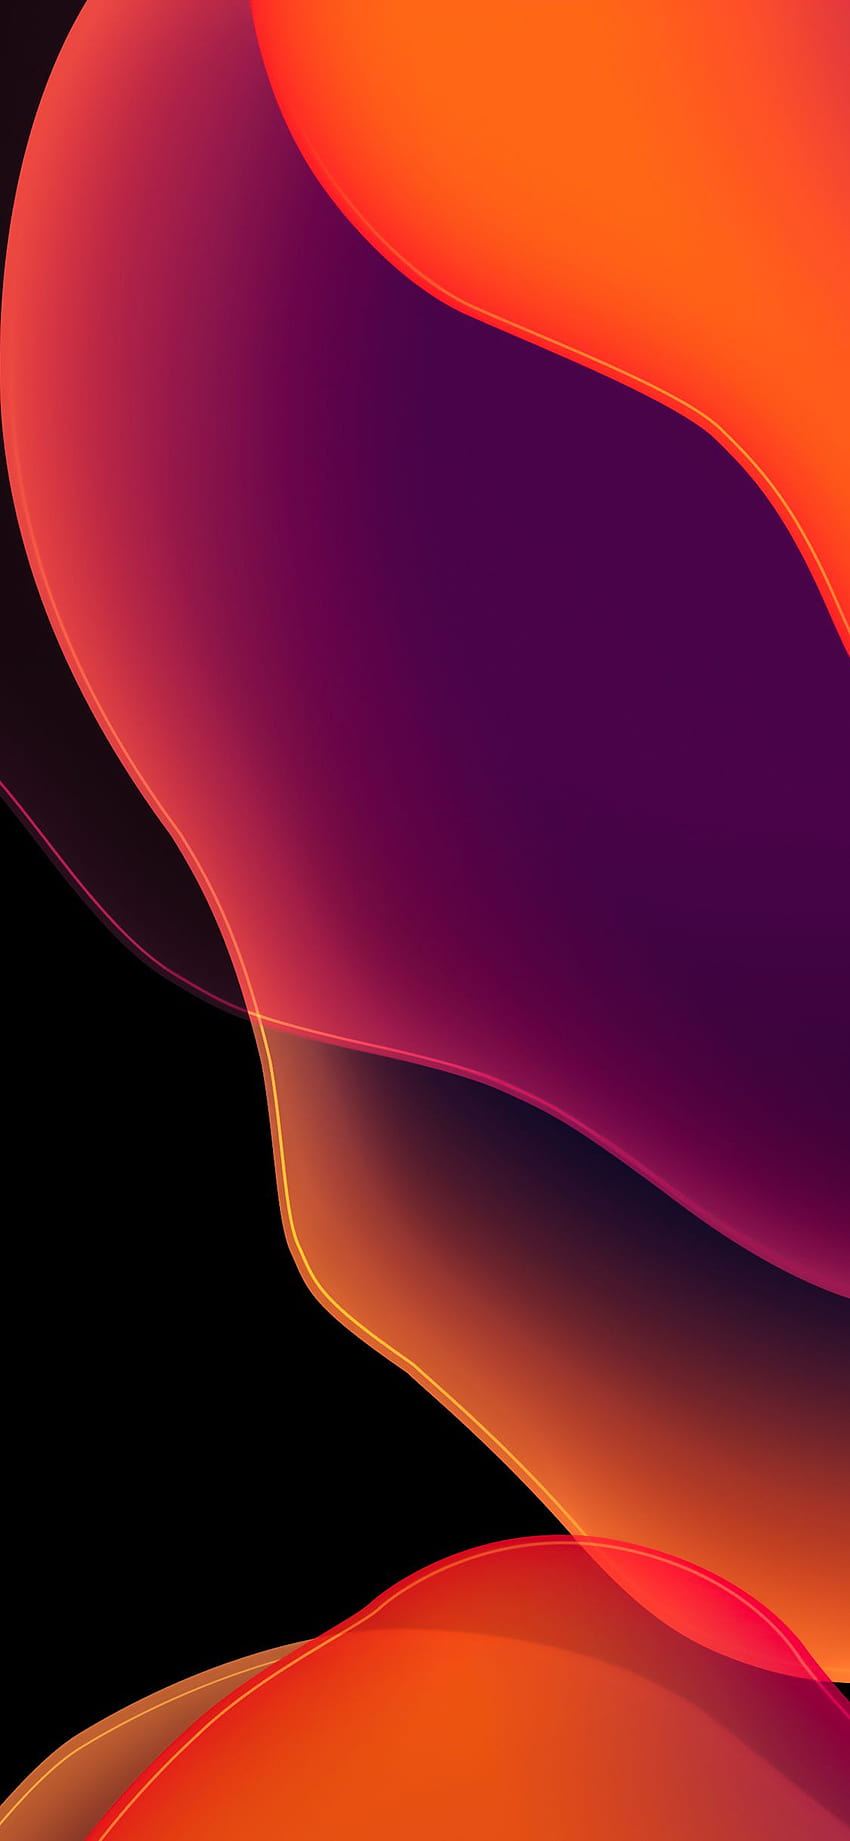 1125x2436 Apple Abstract Dark Red Iphone XS,Iphone 10,Iphone X, apple iphone x cool HD phone wallpaper